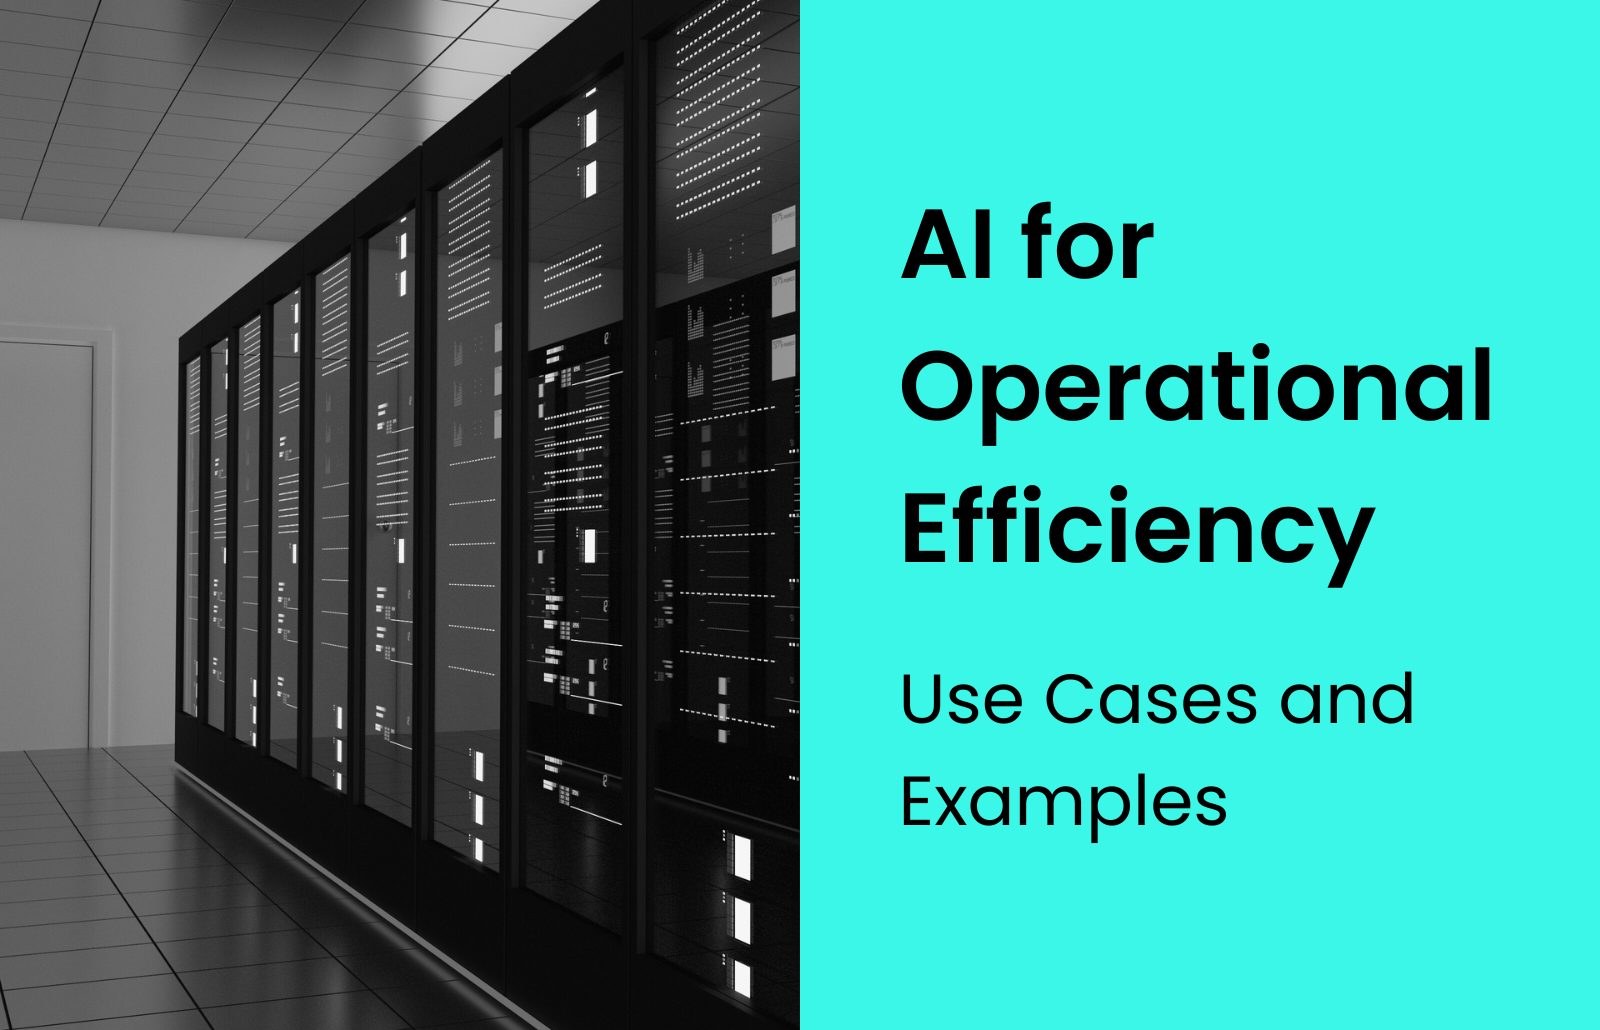 AI for Operational Efficiency - Use Cases and Examples